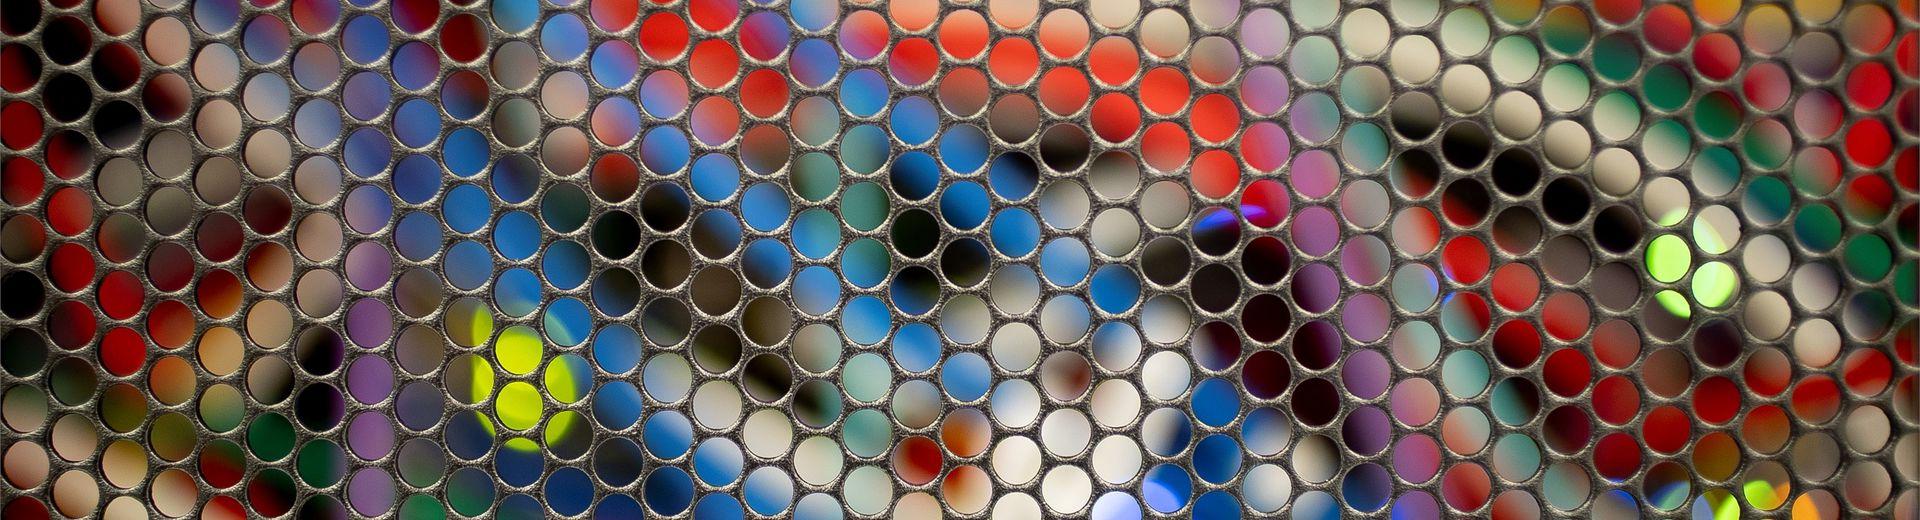 Close up picture of colorful computer cables behind a metal grid of circles.